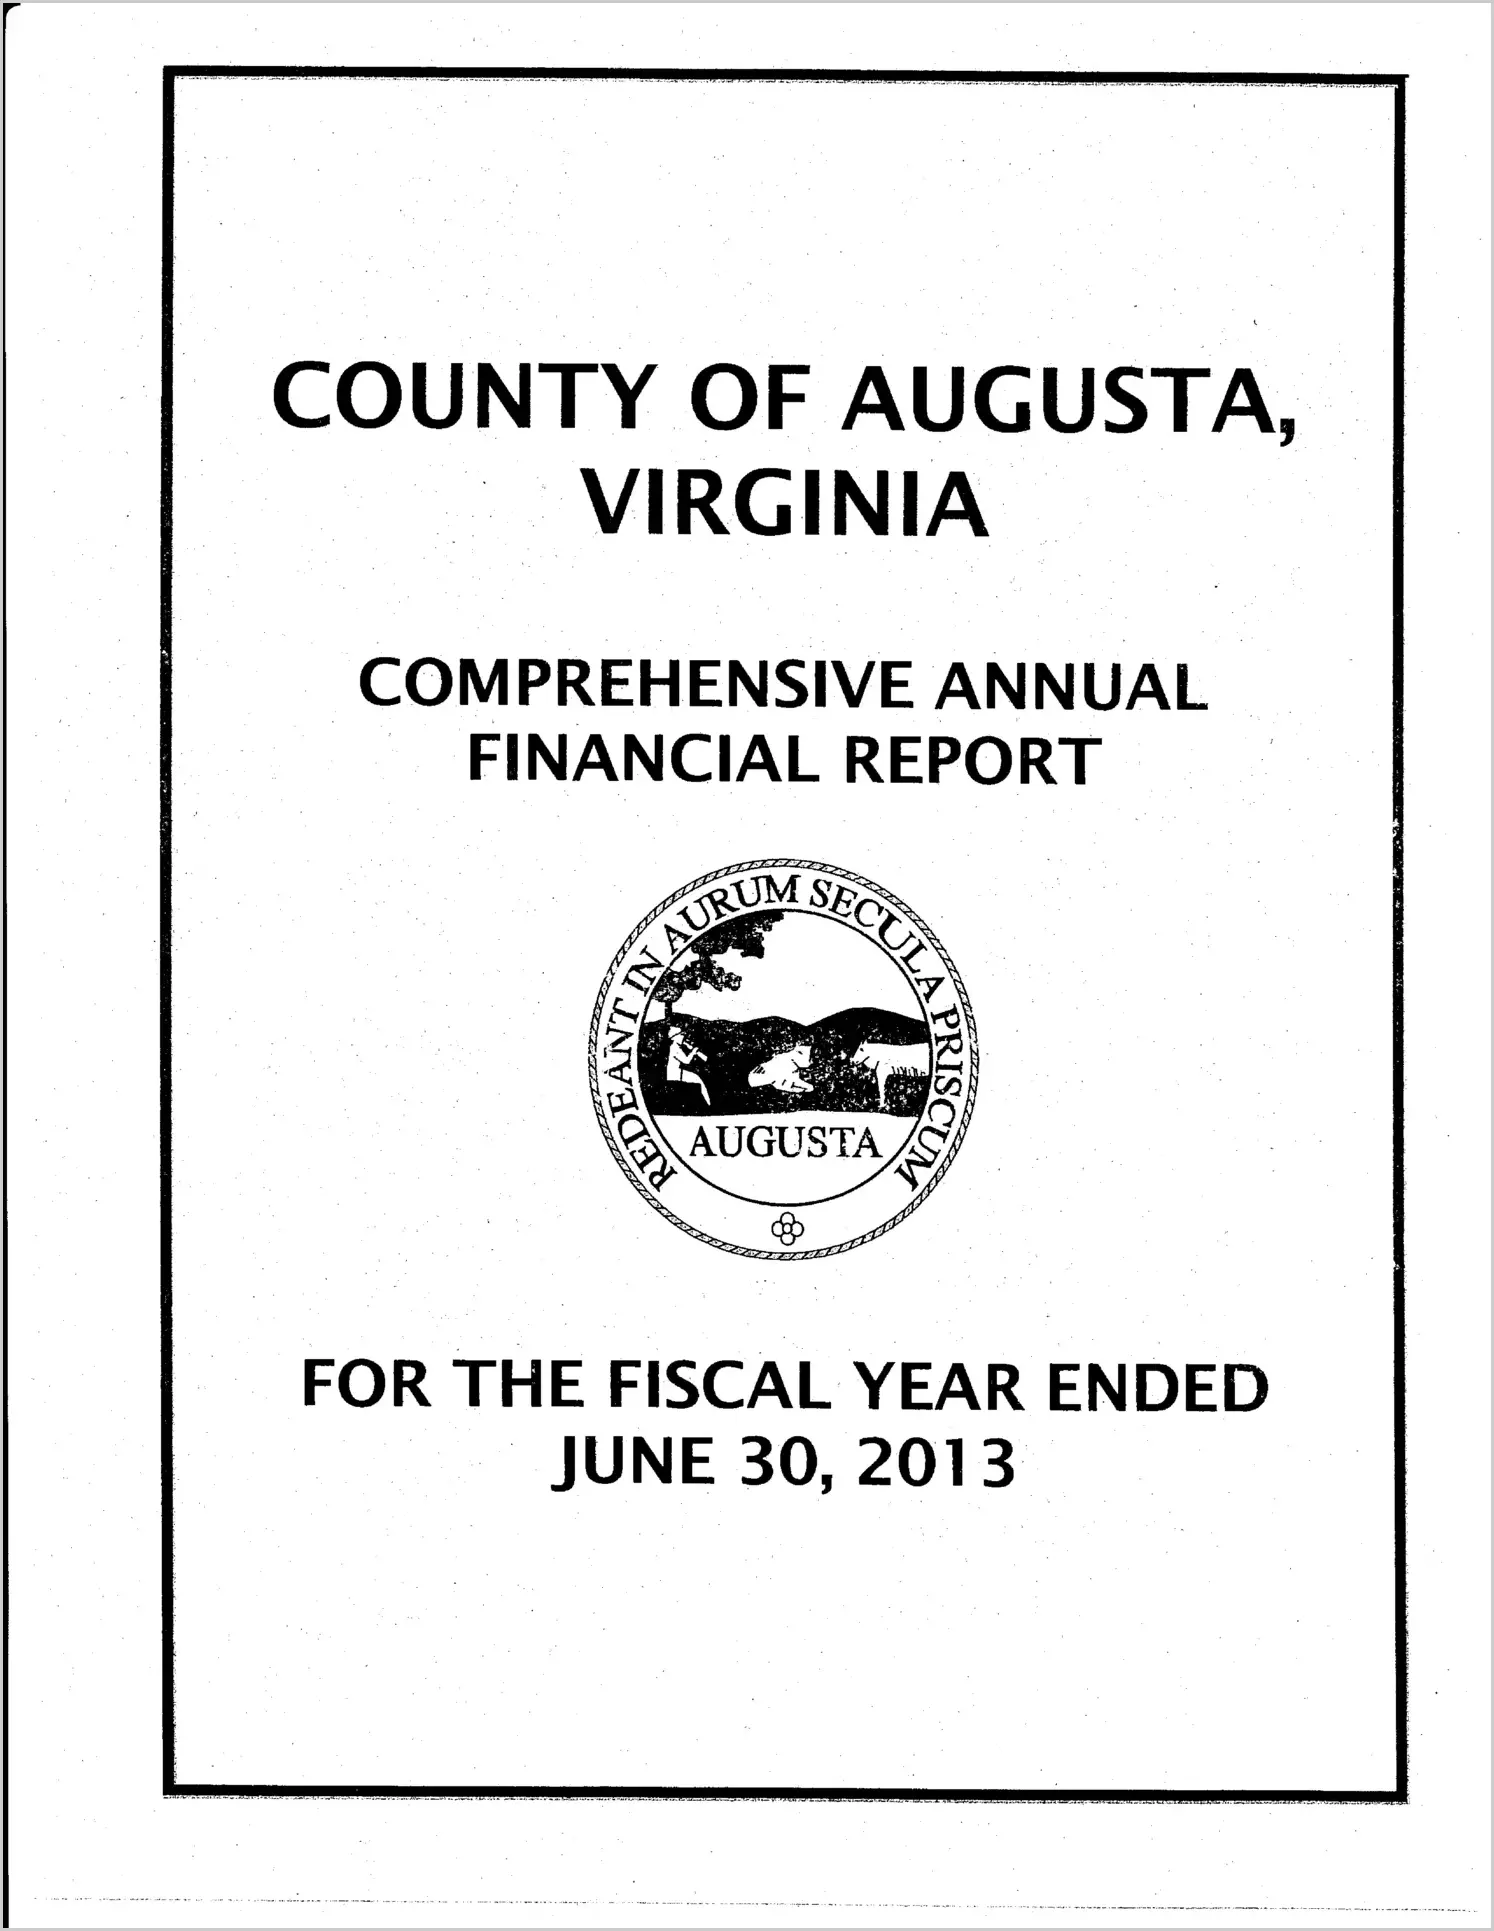 2013 Annual Financial Report for County of Augusta